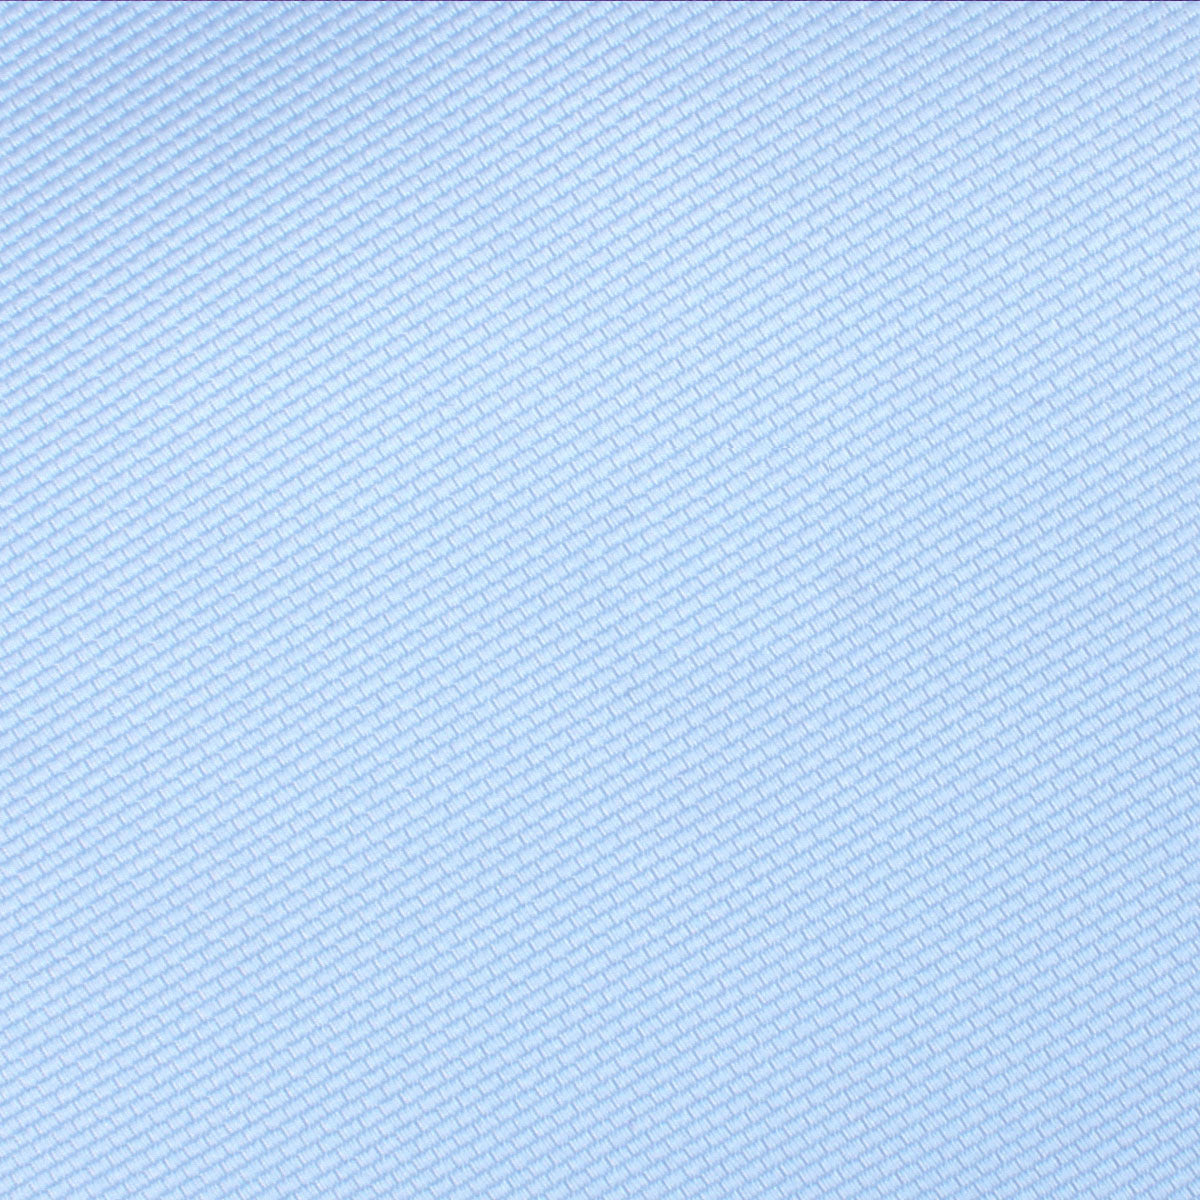 Dusty Ice Blue Weave Pocket Square Fabric